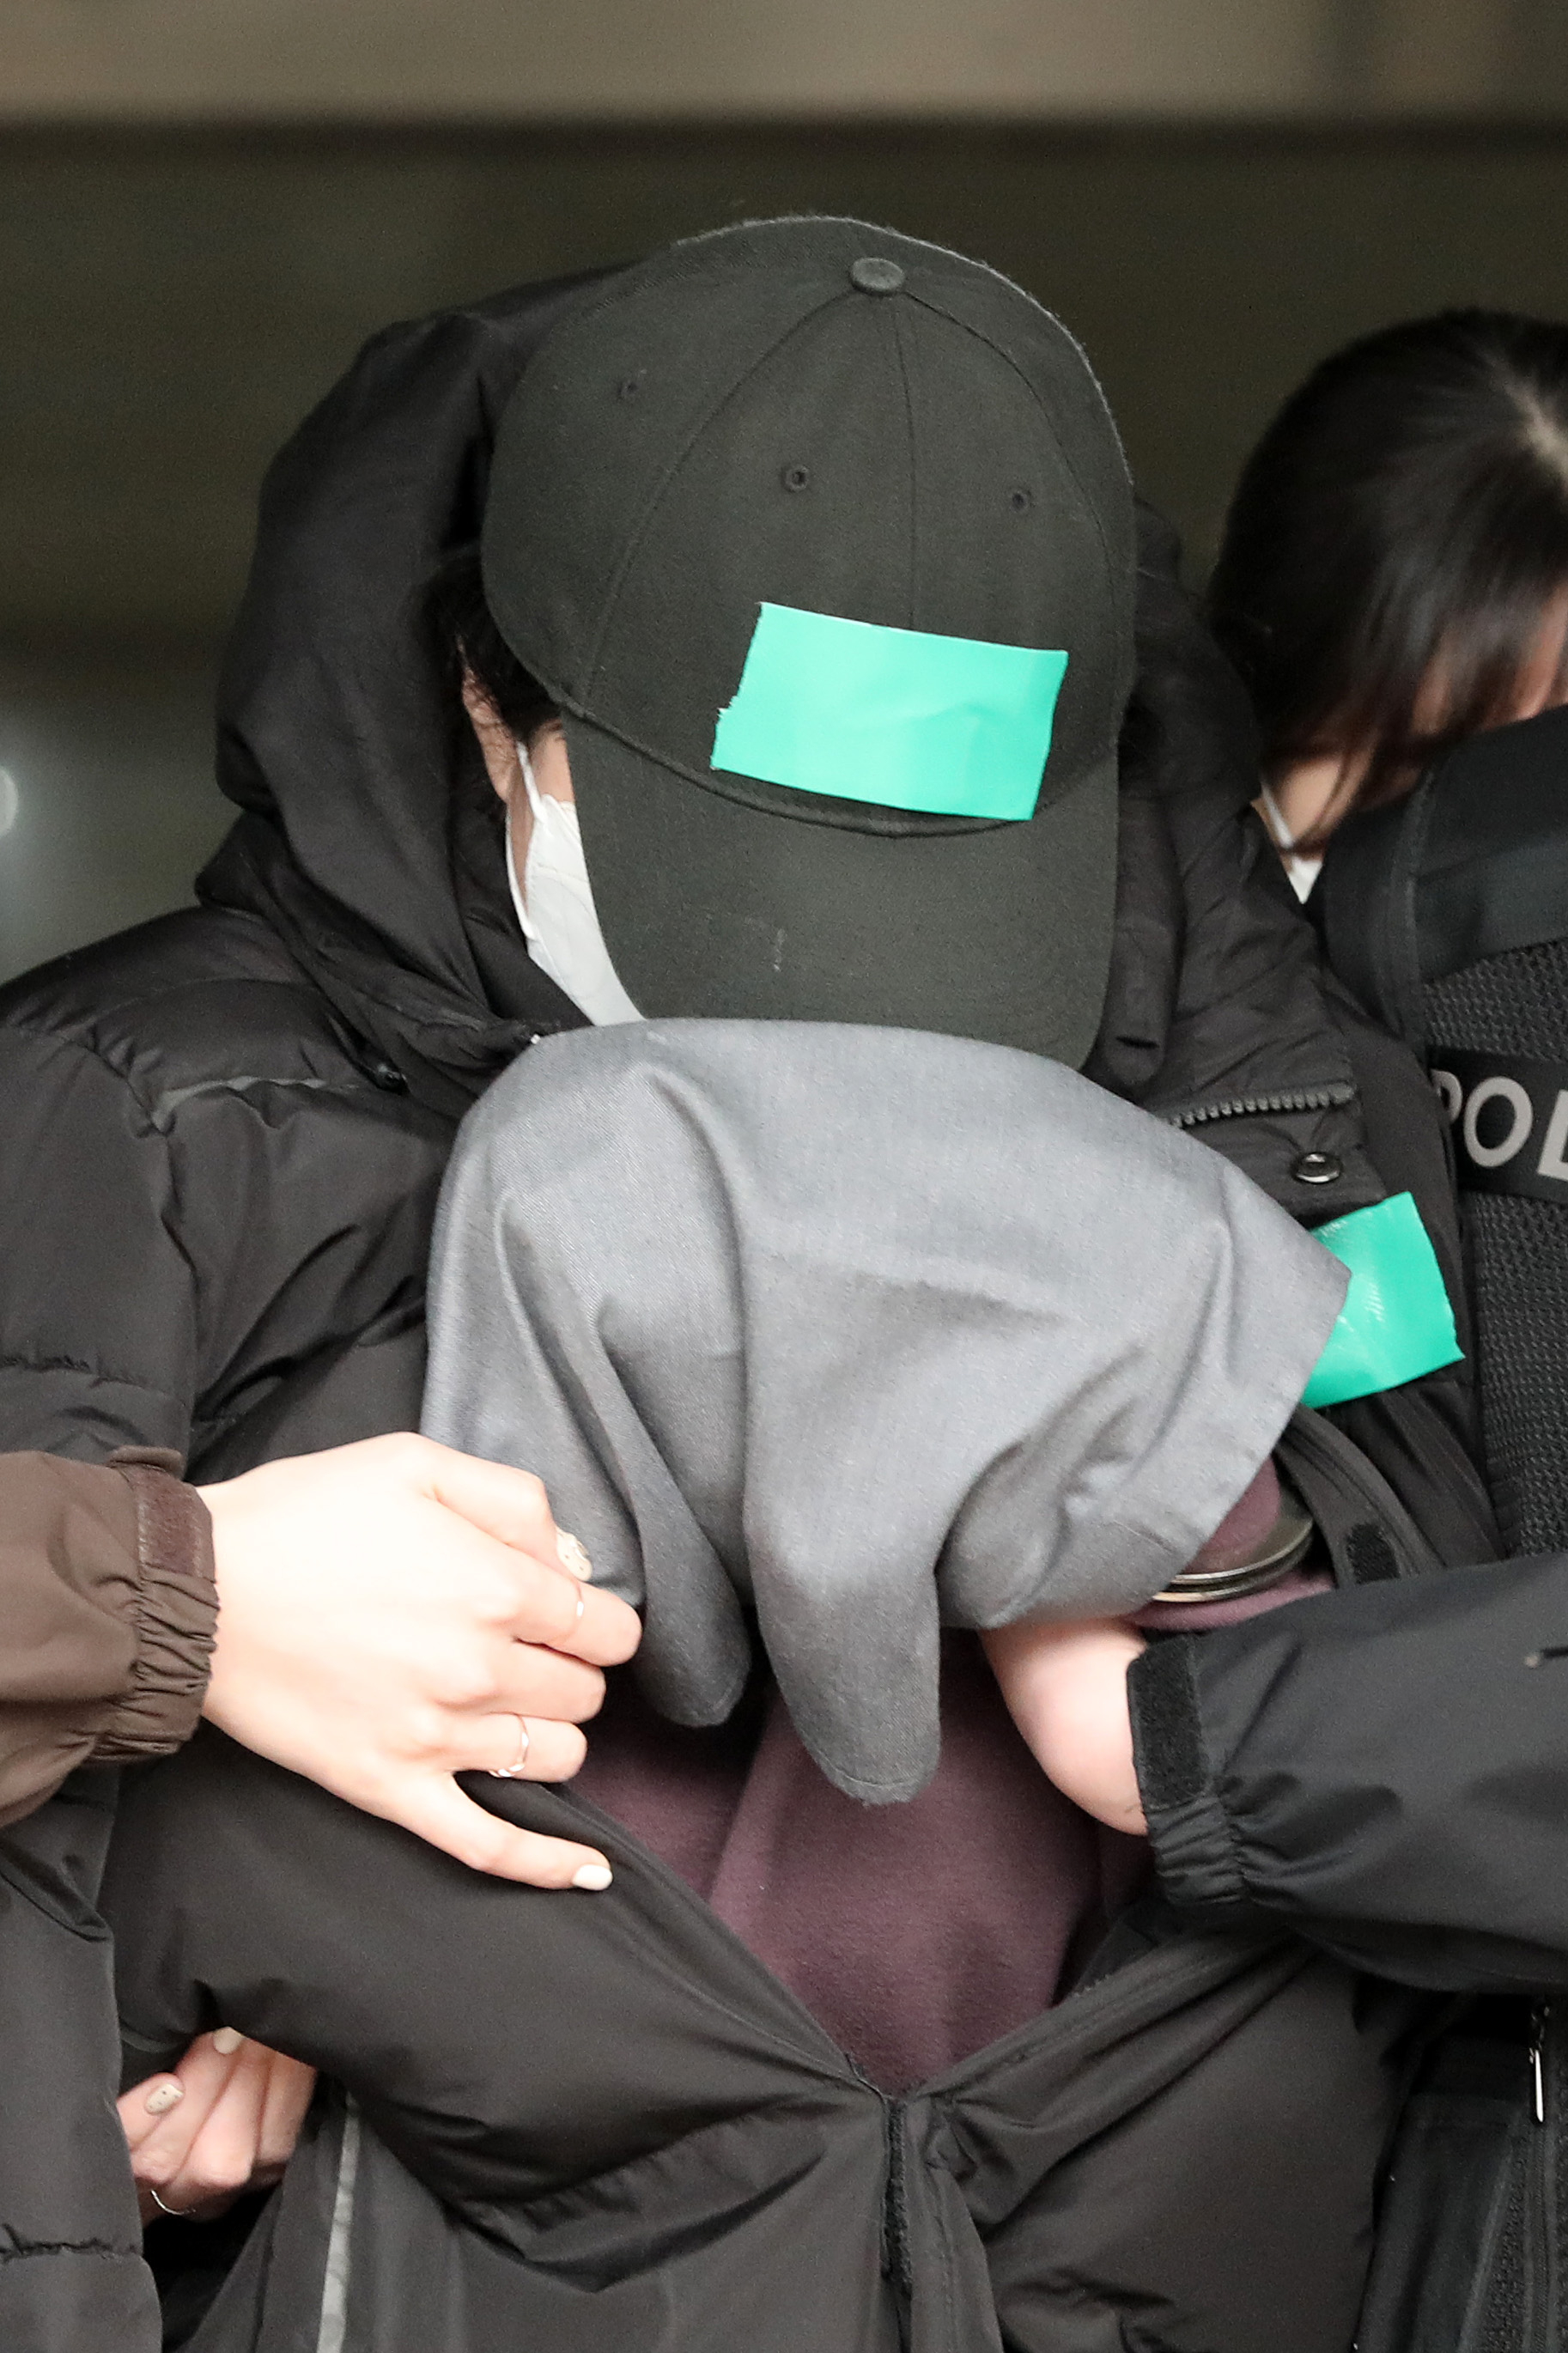 10-year-old nephew tortured aunt, 119 yen “I hit him and drowned…”